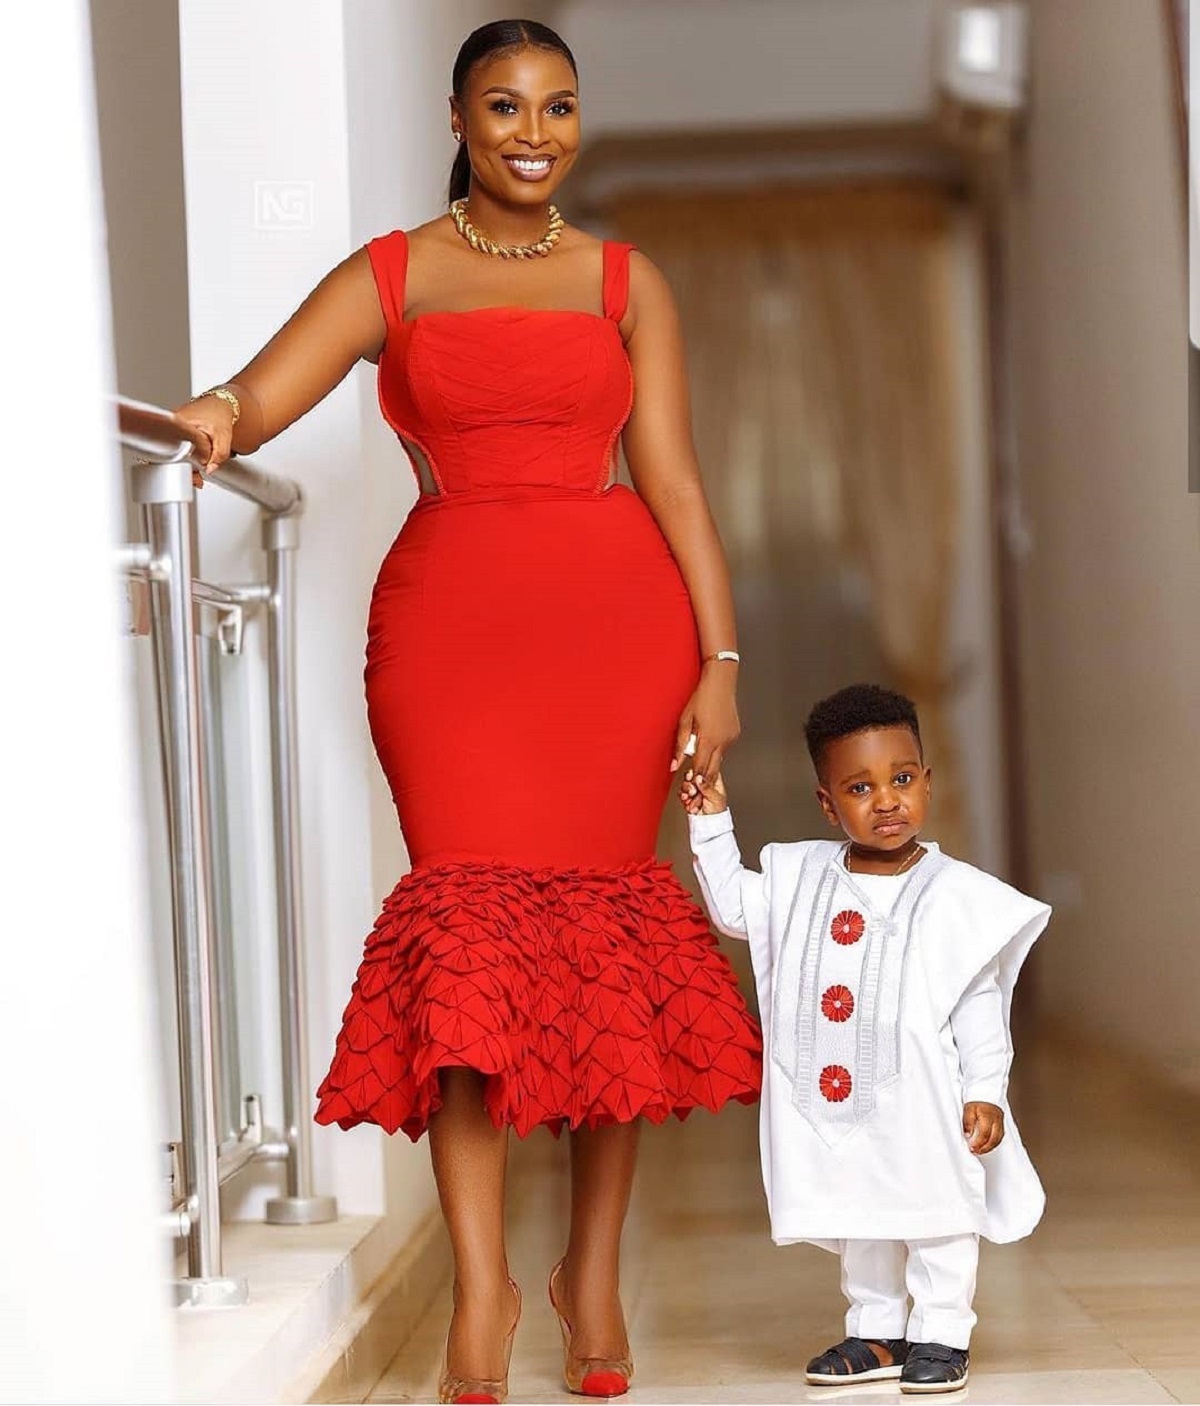 John Dumelo’s son cries in new photos with mother